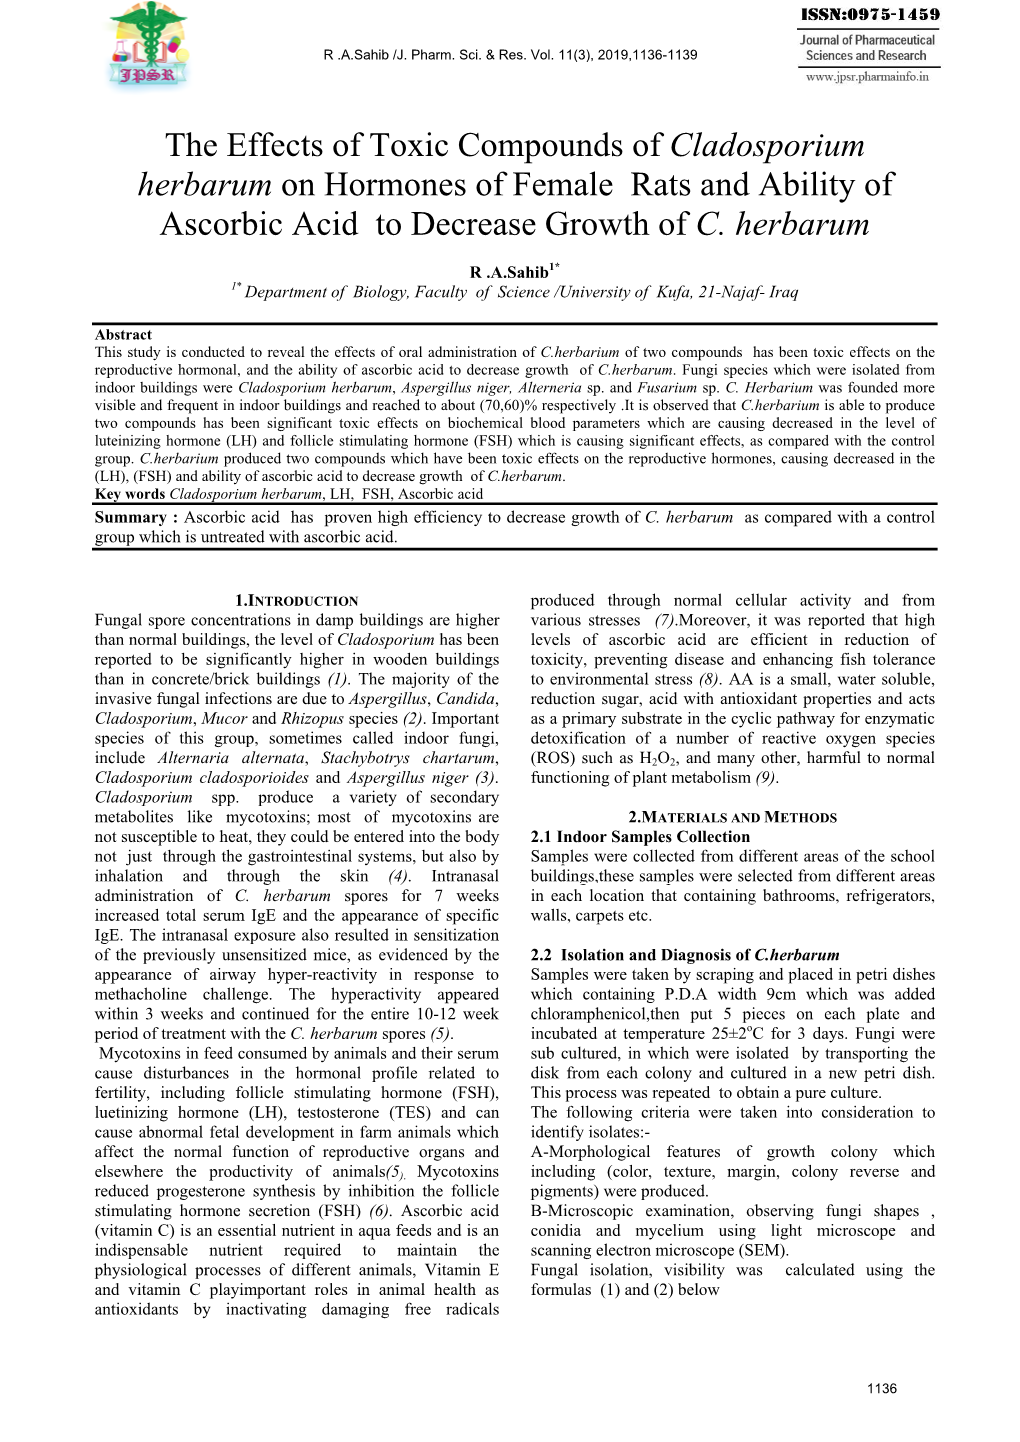 The Effects of Toxic Compounds of Cladosporium Herbarum on Hormones of Female Rats and Ability of Ascorbic Acid to Decrease Growth of C